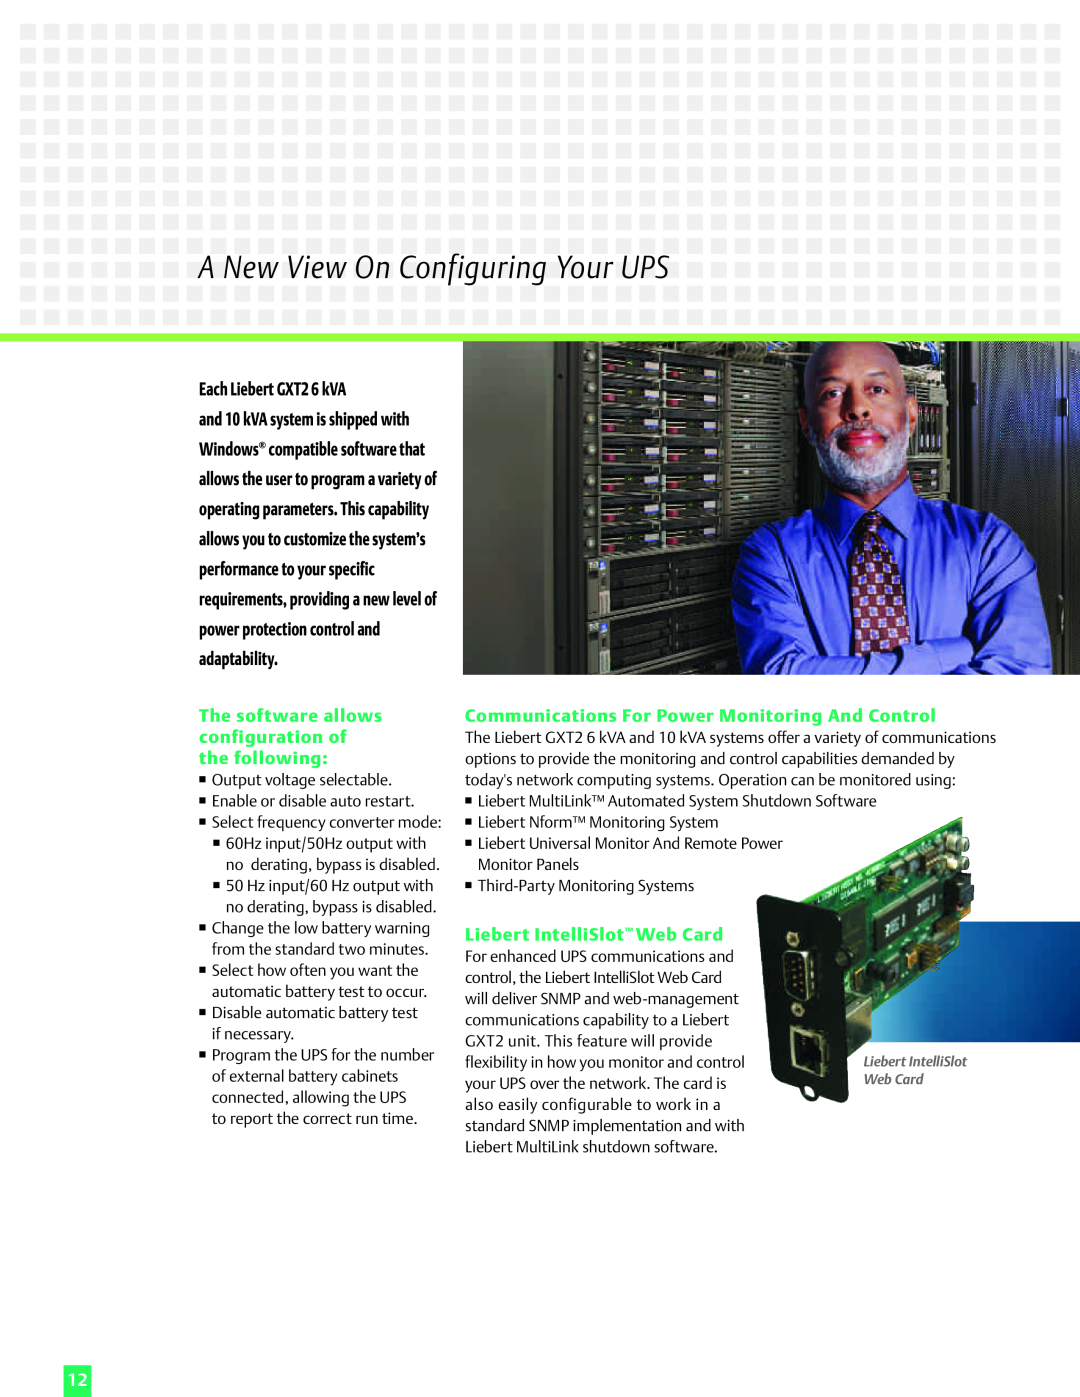 Emerson ANew View On ConfiguringYour UPS, Each Liebert GXT2 6 kVA, The software allows configuration of the following 